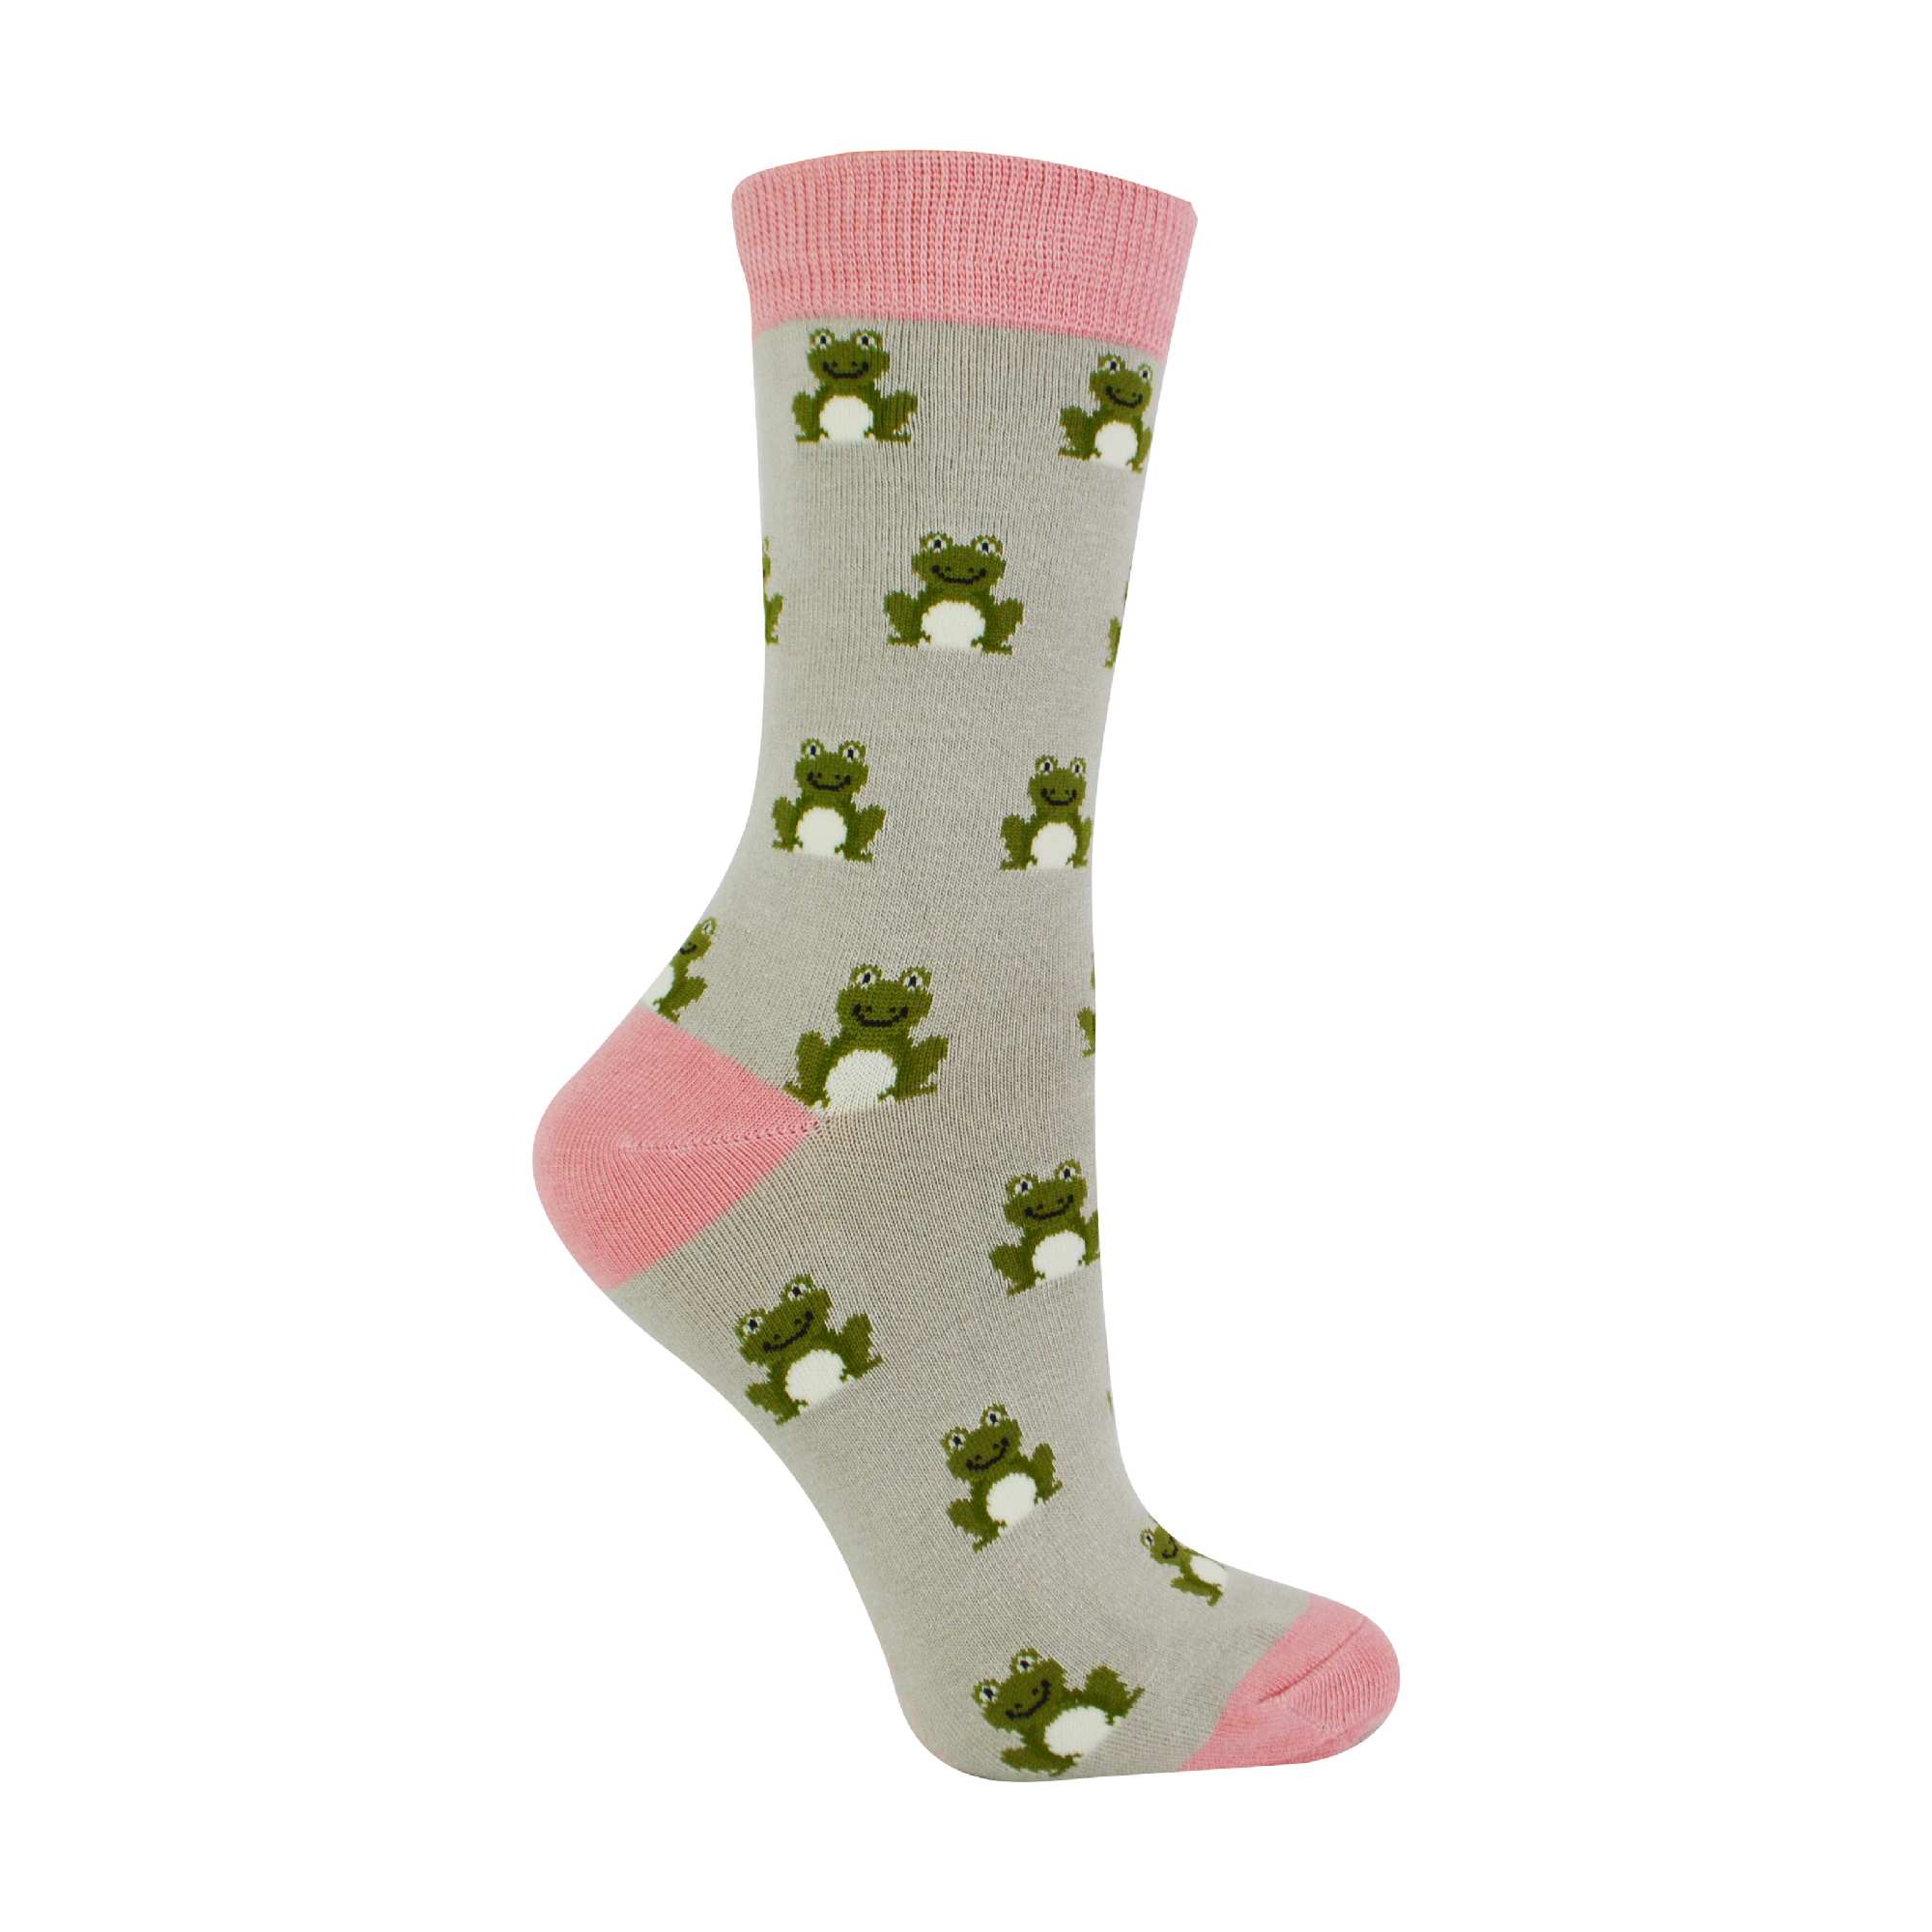 Frog Bamboo Socks for Ladies by Miss Sparrow | Novelty Animal Patterns